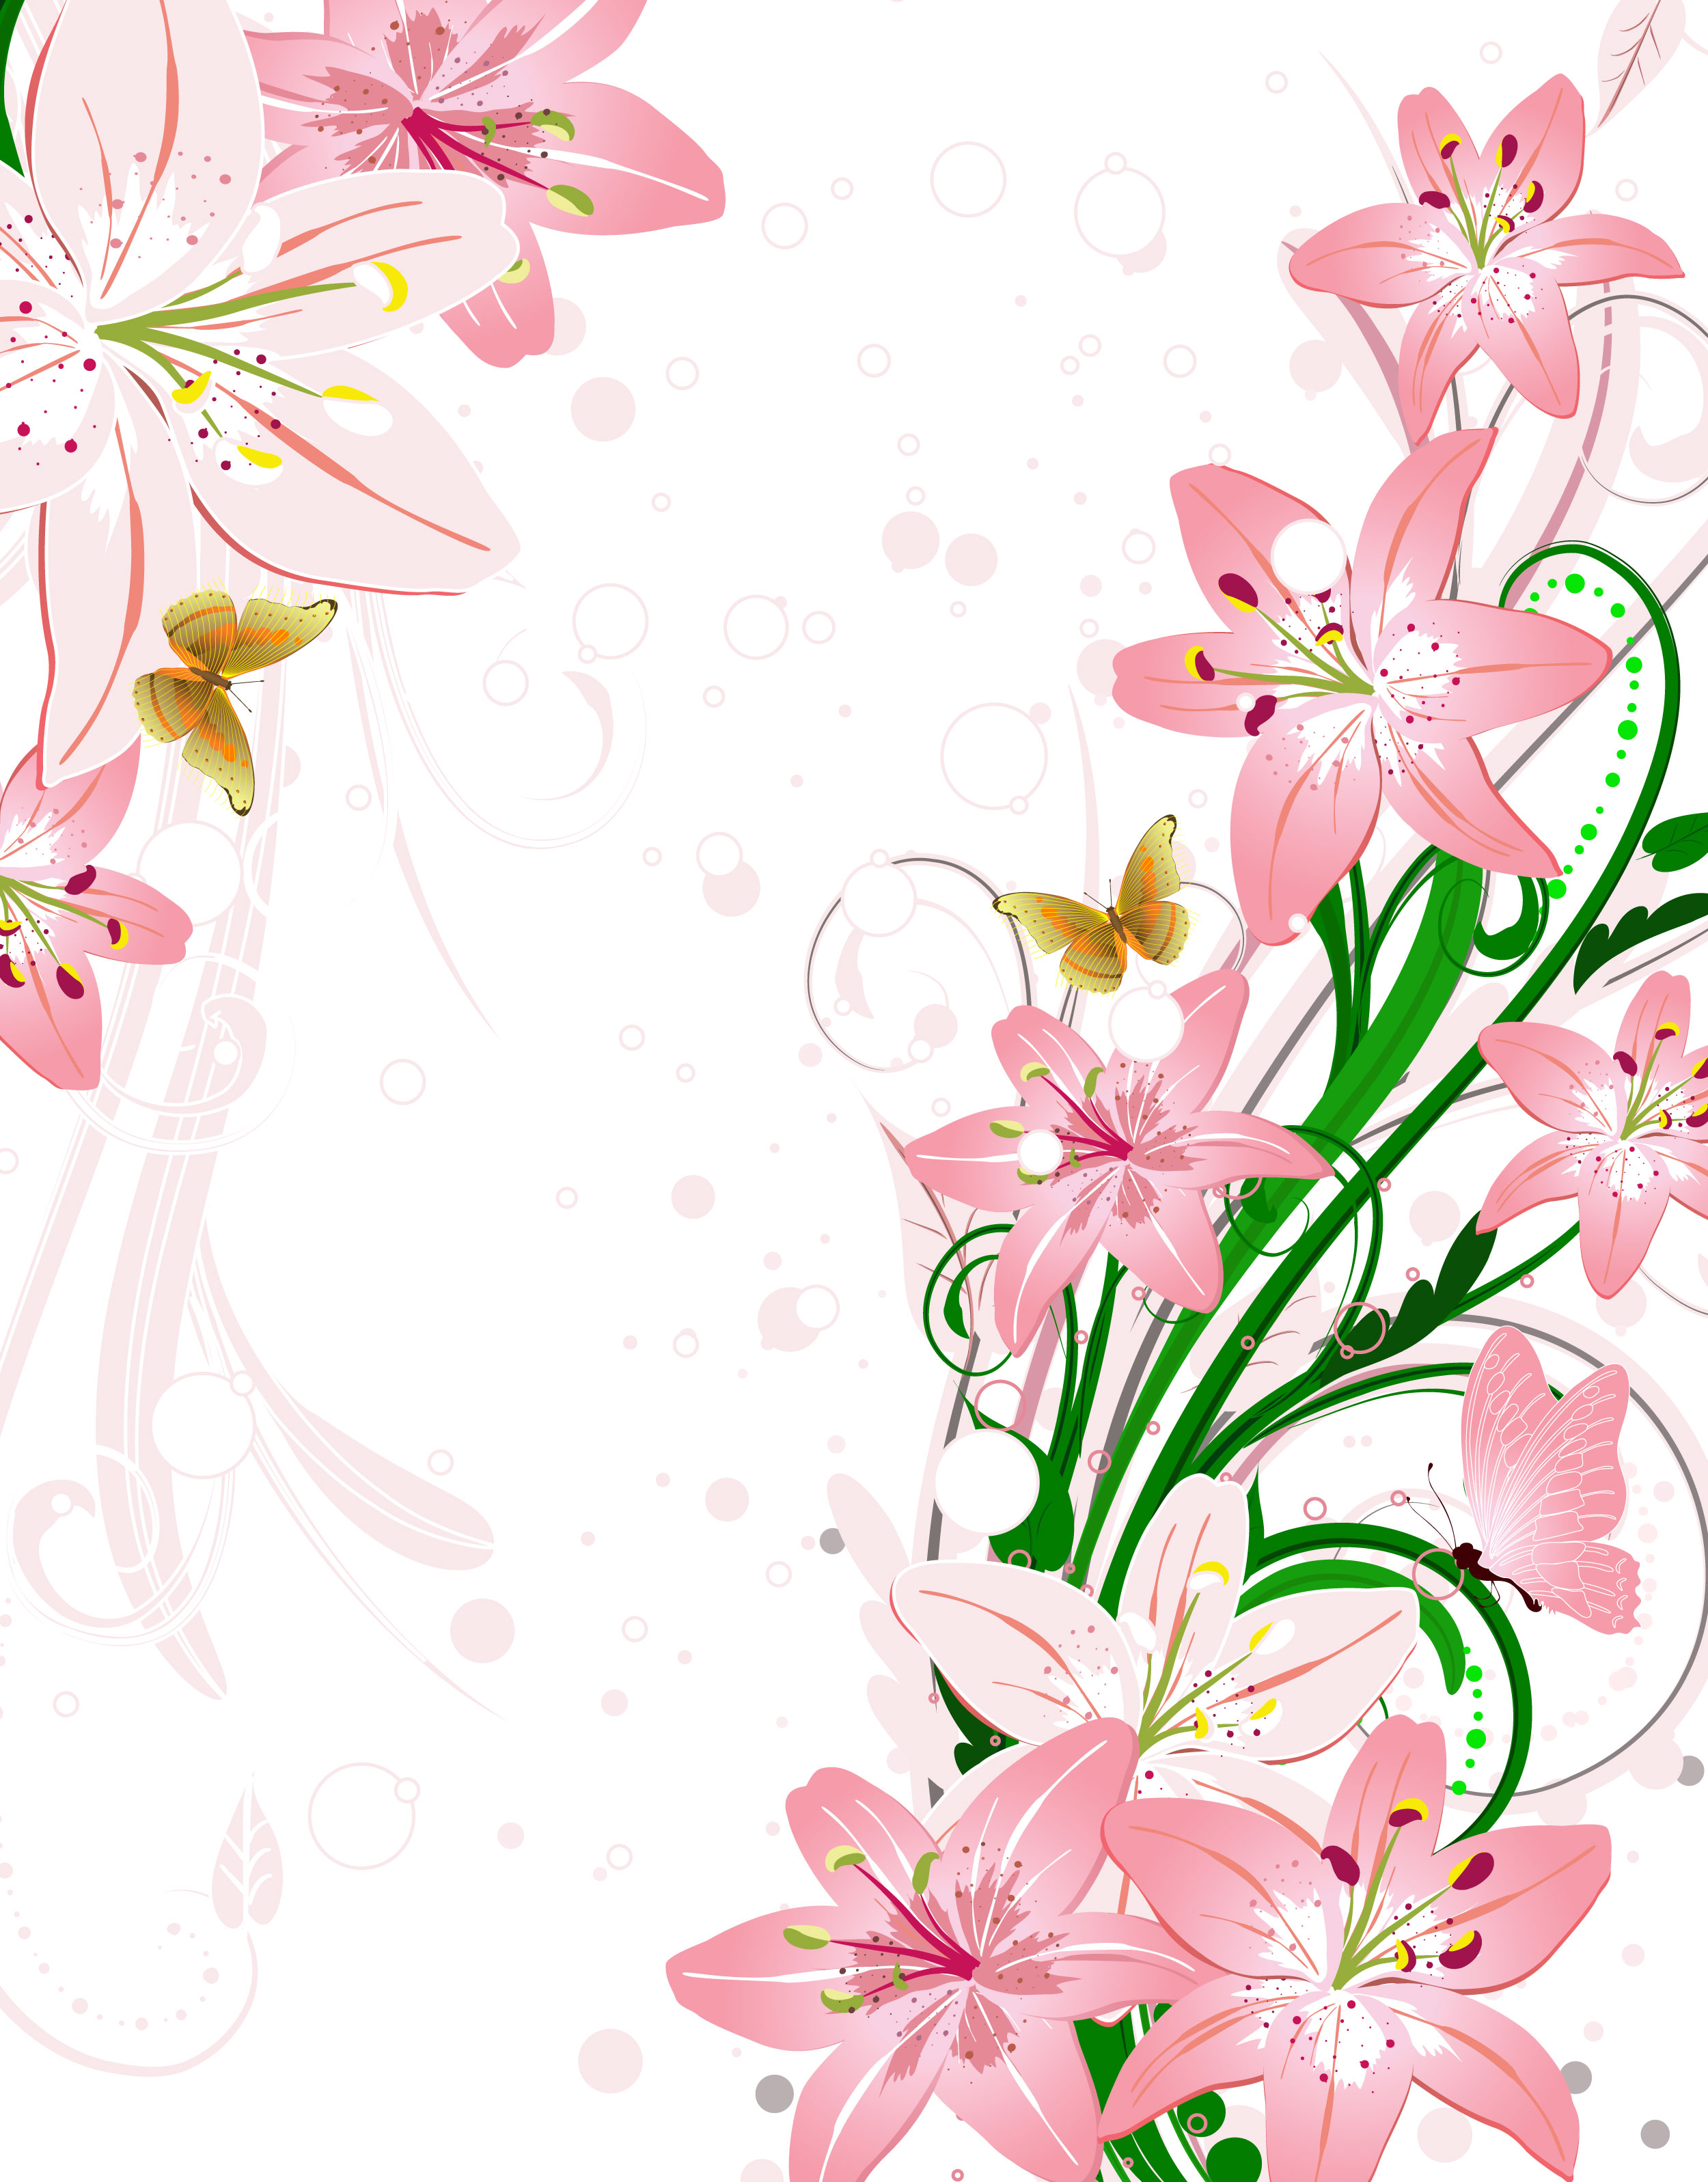 flower clipart for photoshop - photo #50